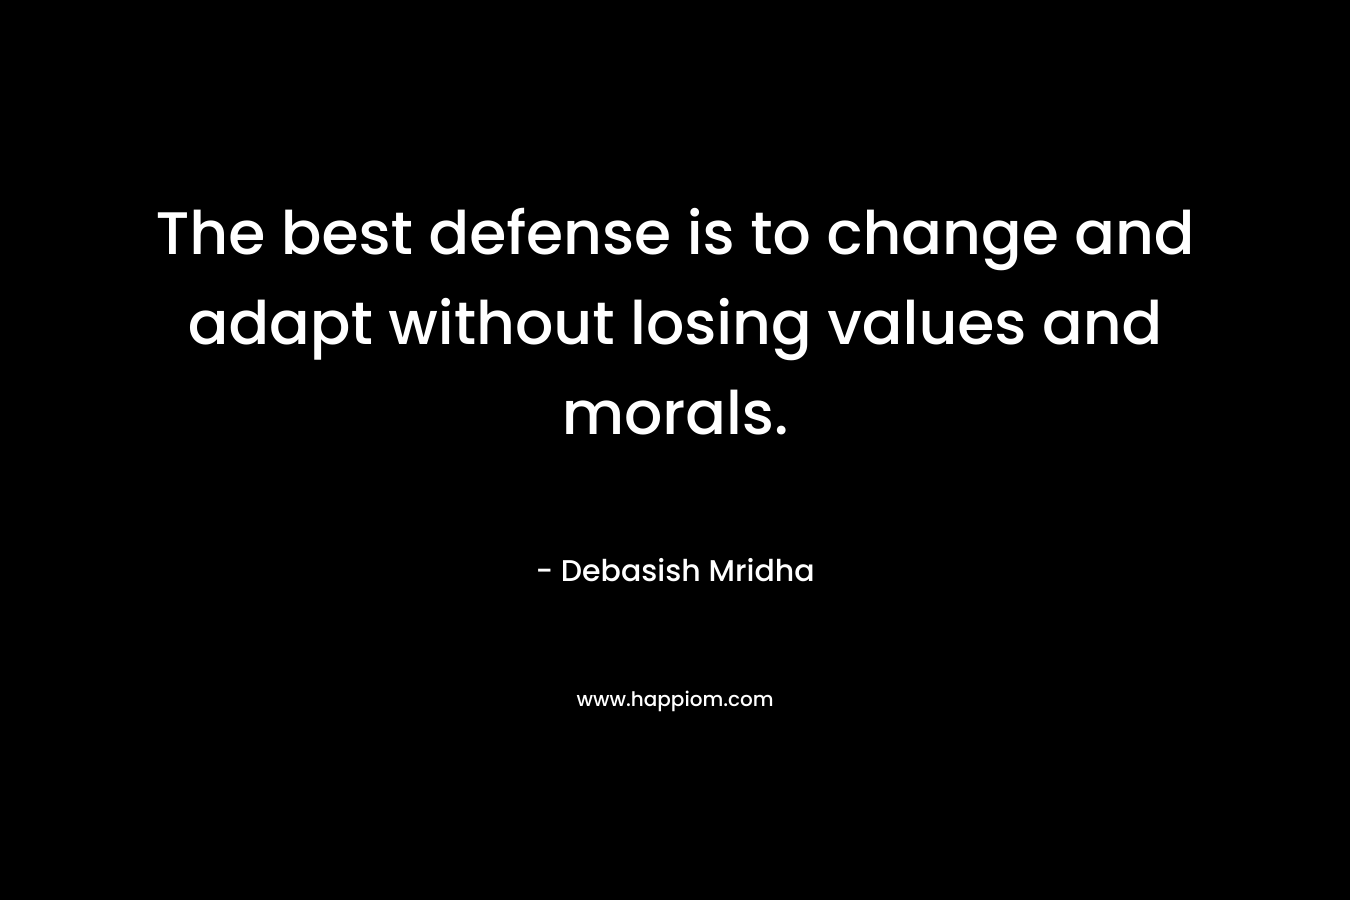 The best defense is to change and adapt without losing values and morals. – Debasish Mridha